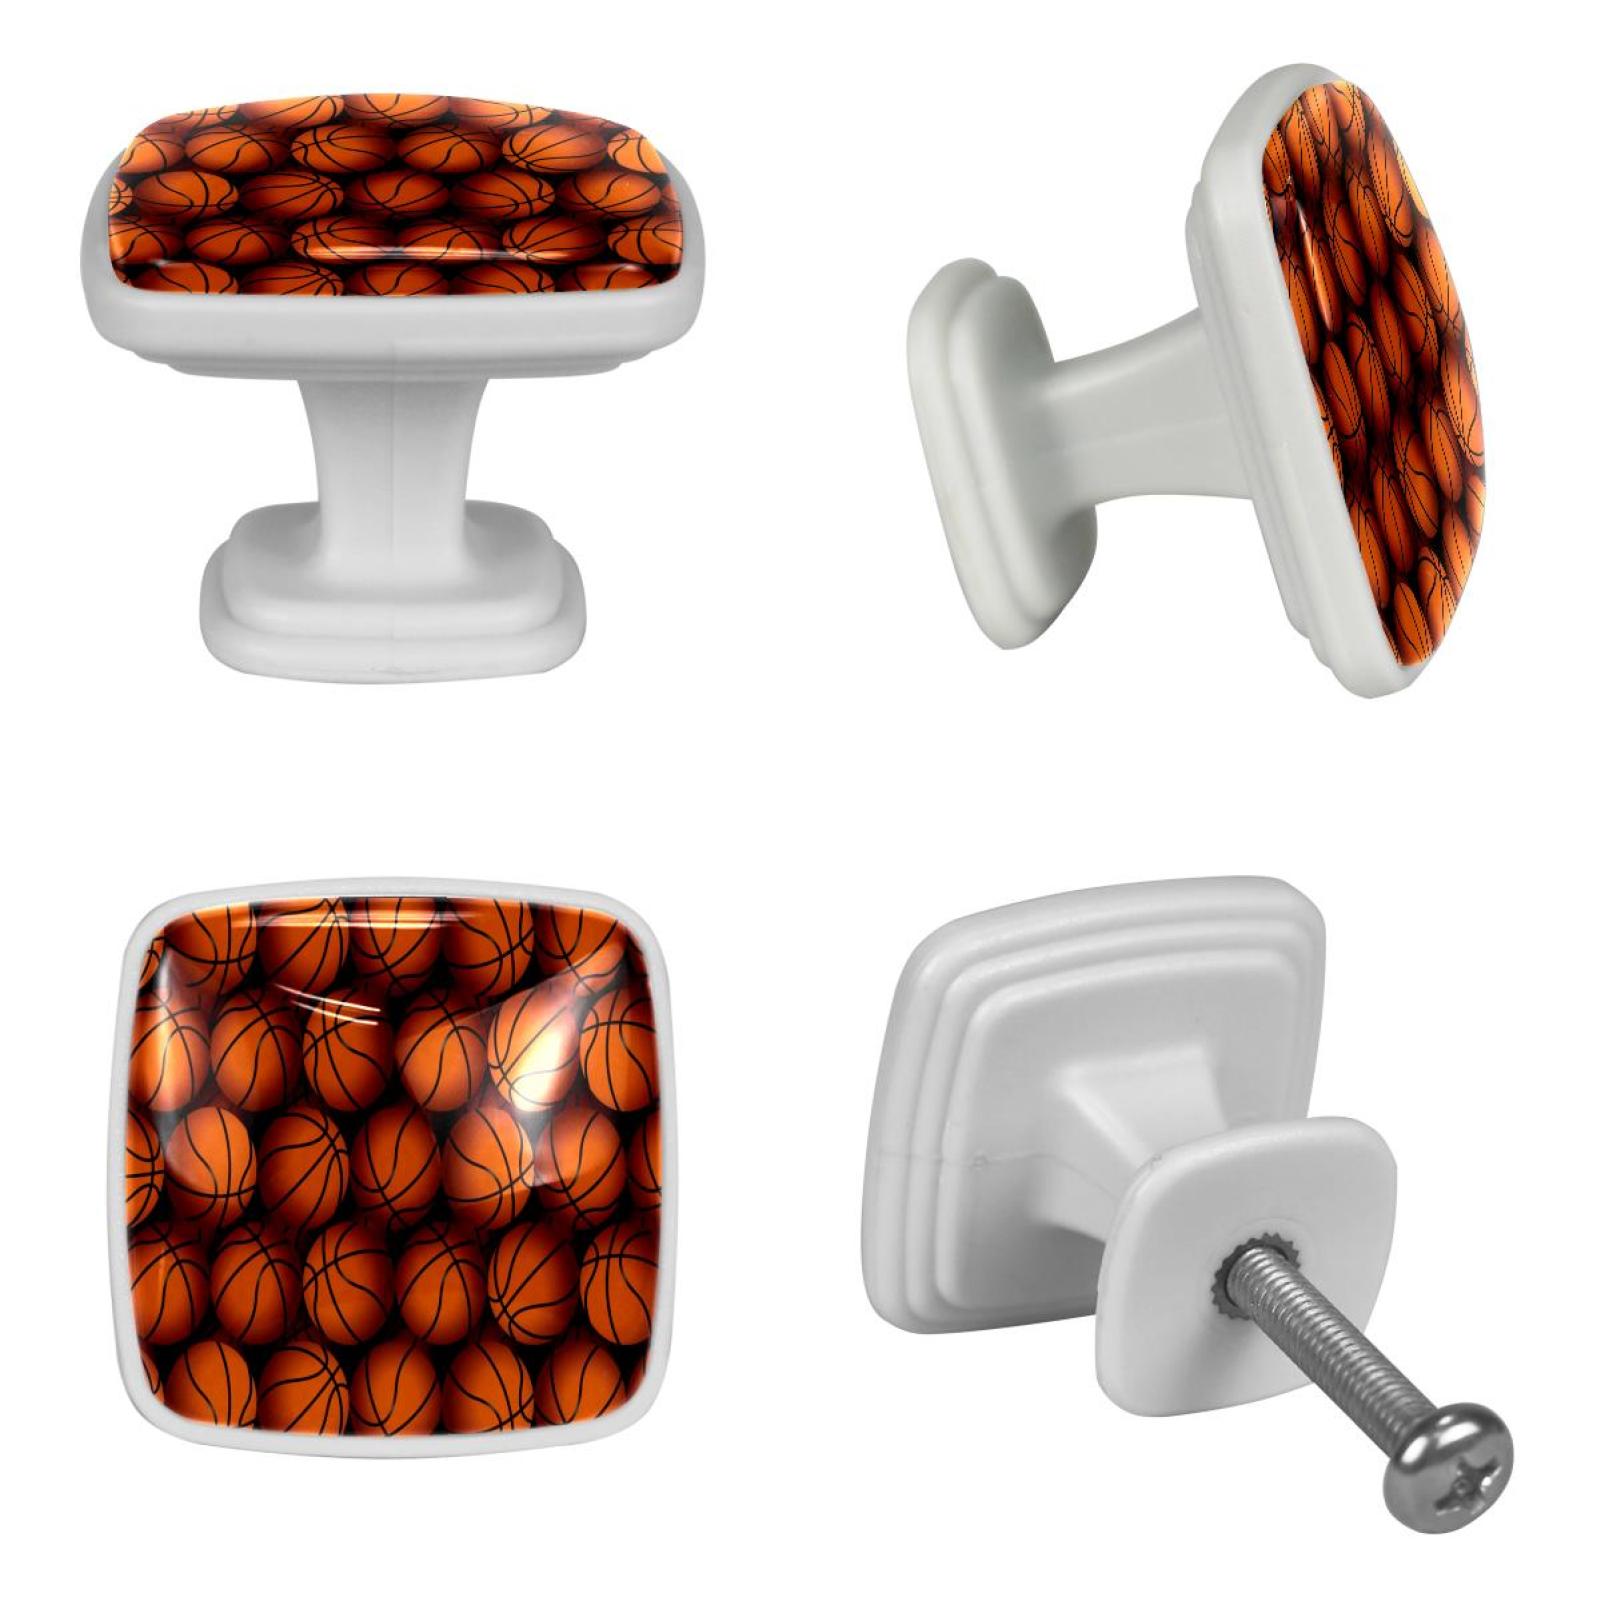 Ownta 4 Pcs Square Cabinet Handle Cupboard Fluorescence Knob Glowing in the Dark Drawer Pulls Handle Drawer Knobs with Screws Furniture Decor Sports Basketball Pattern Orange - image 4 of 5